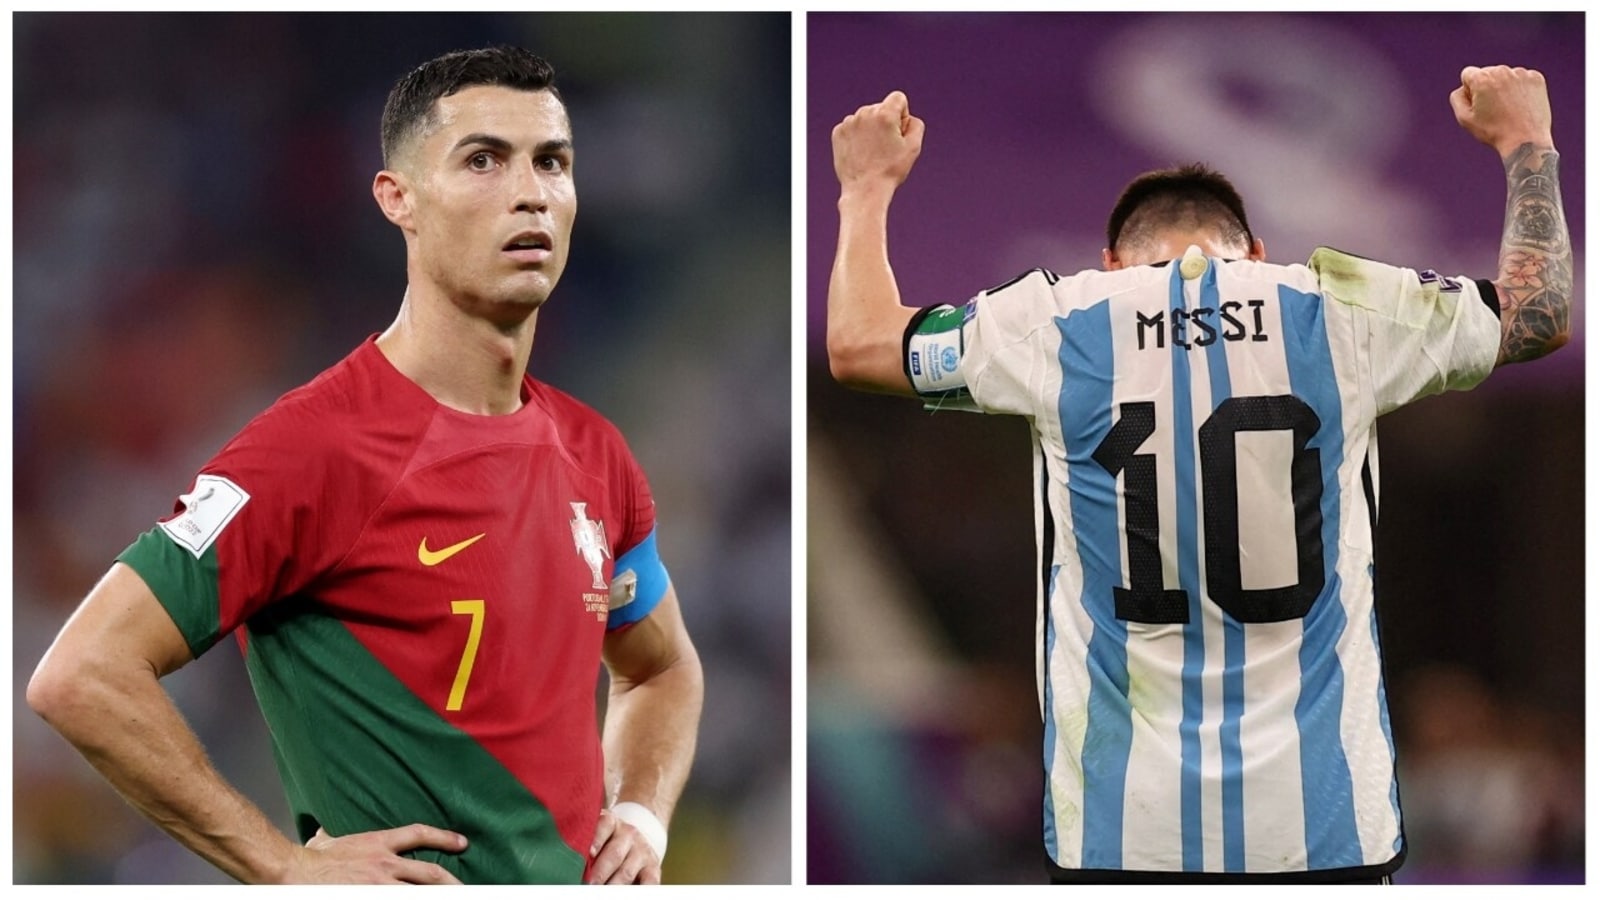 World Cup 2022: Lionel Messi and Cristiano Ronaldo play together ahead of  the Qatar 2022 FIFA World Cup